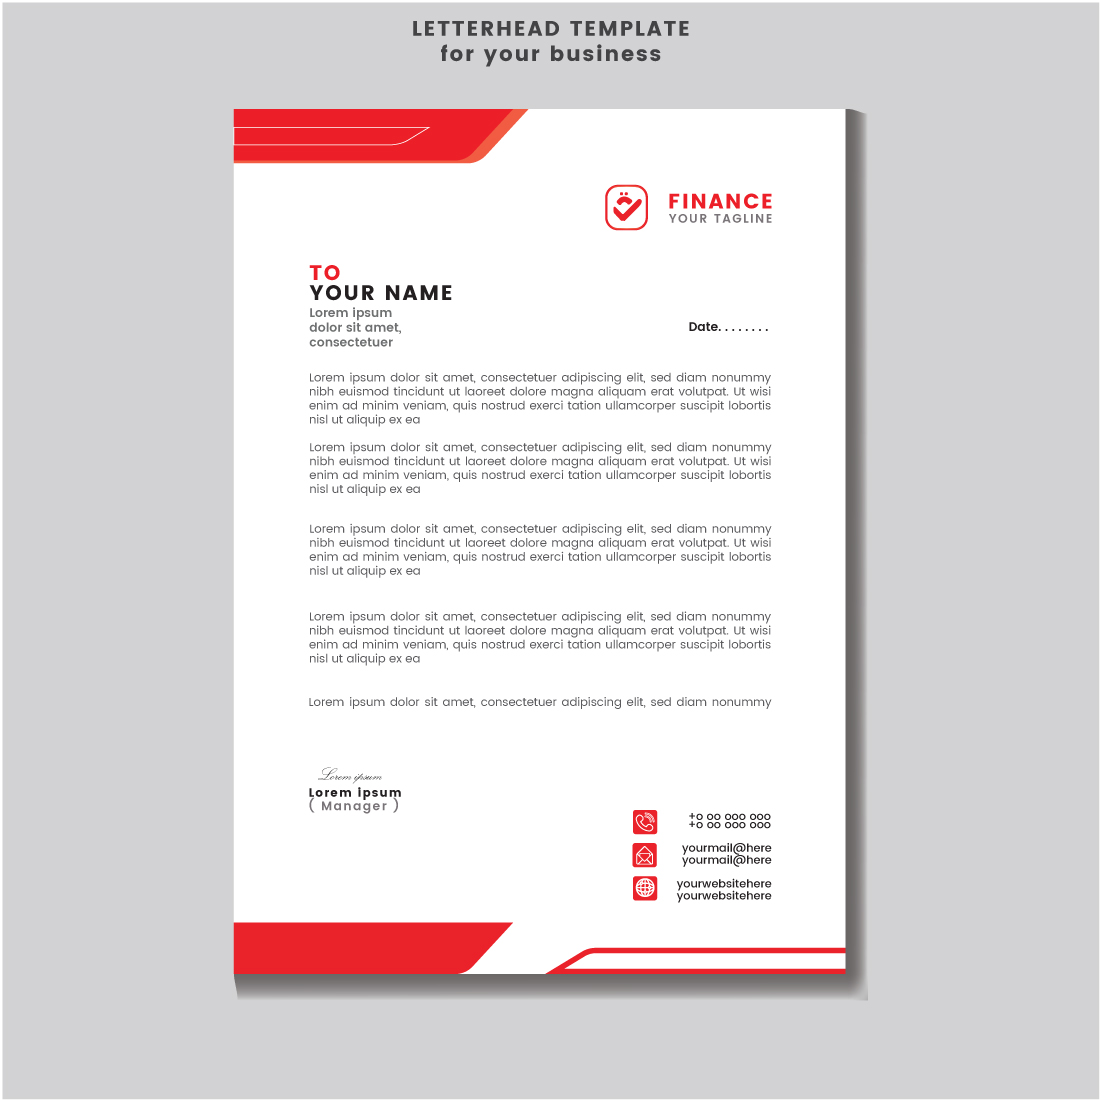 Letterhead template design for your business Flyer Design Template stock illustrationFlyer template cover image.